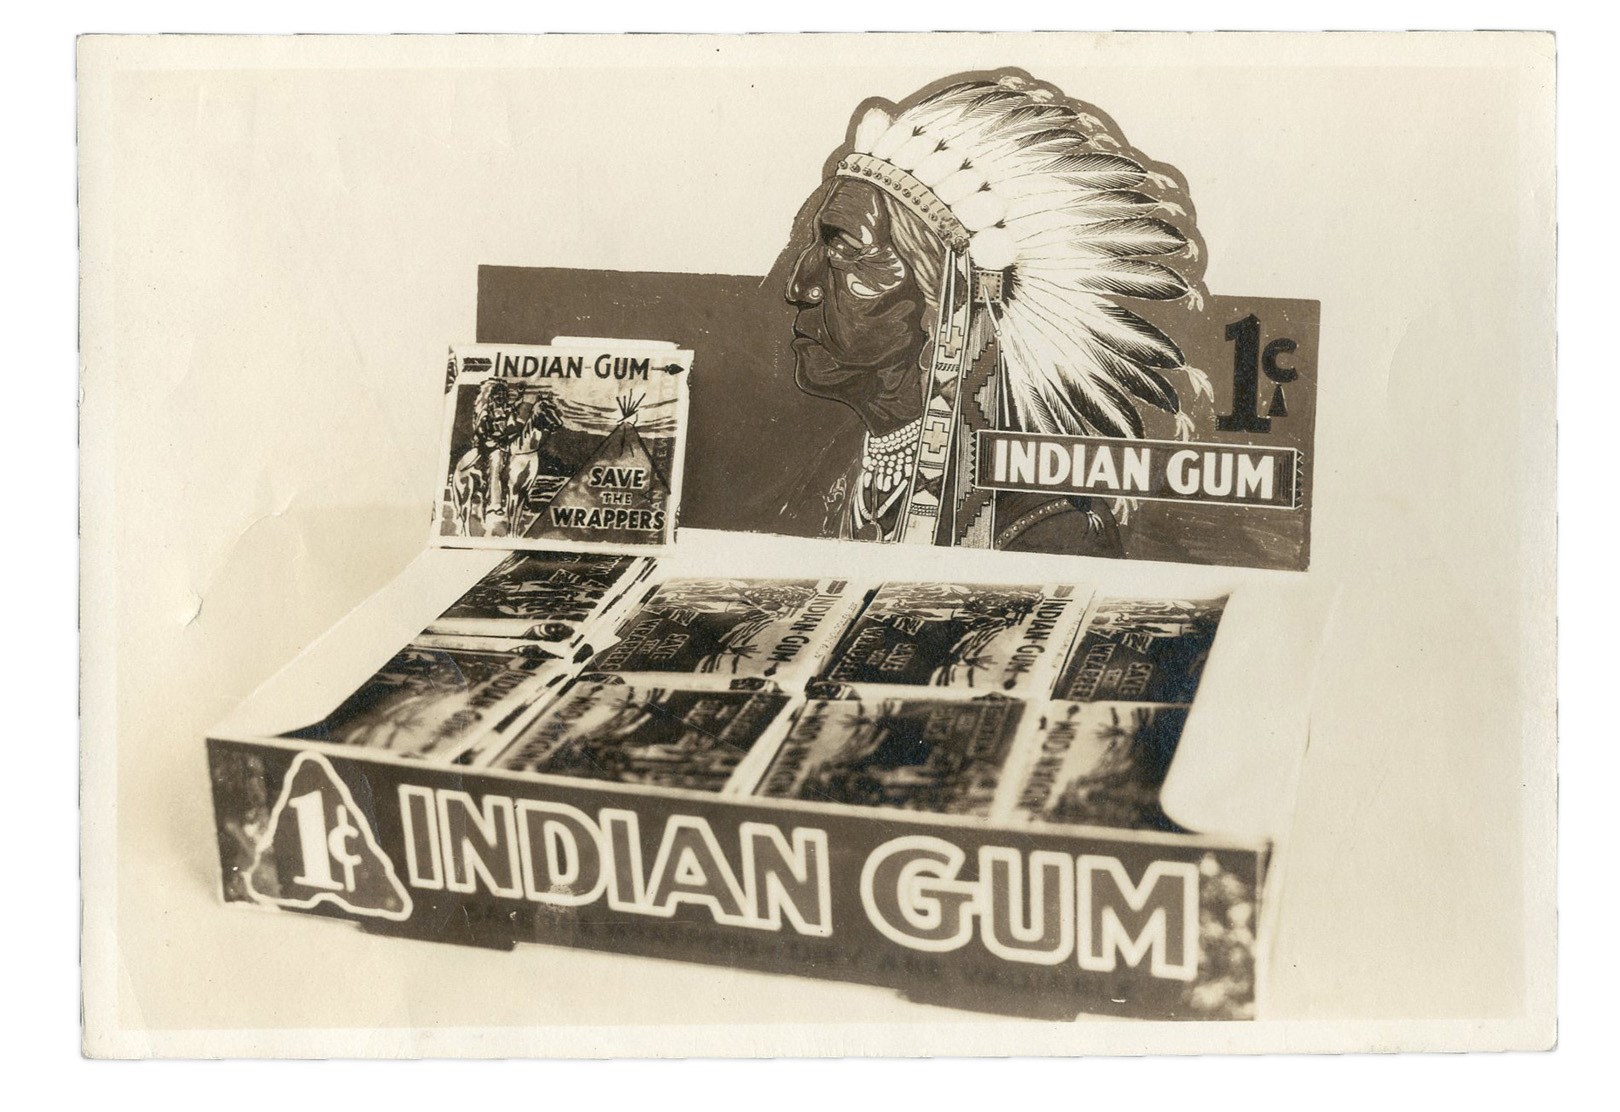 - 1930s Indian Gum Original Picture of Wax Box - from the Goudey Files!